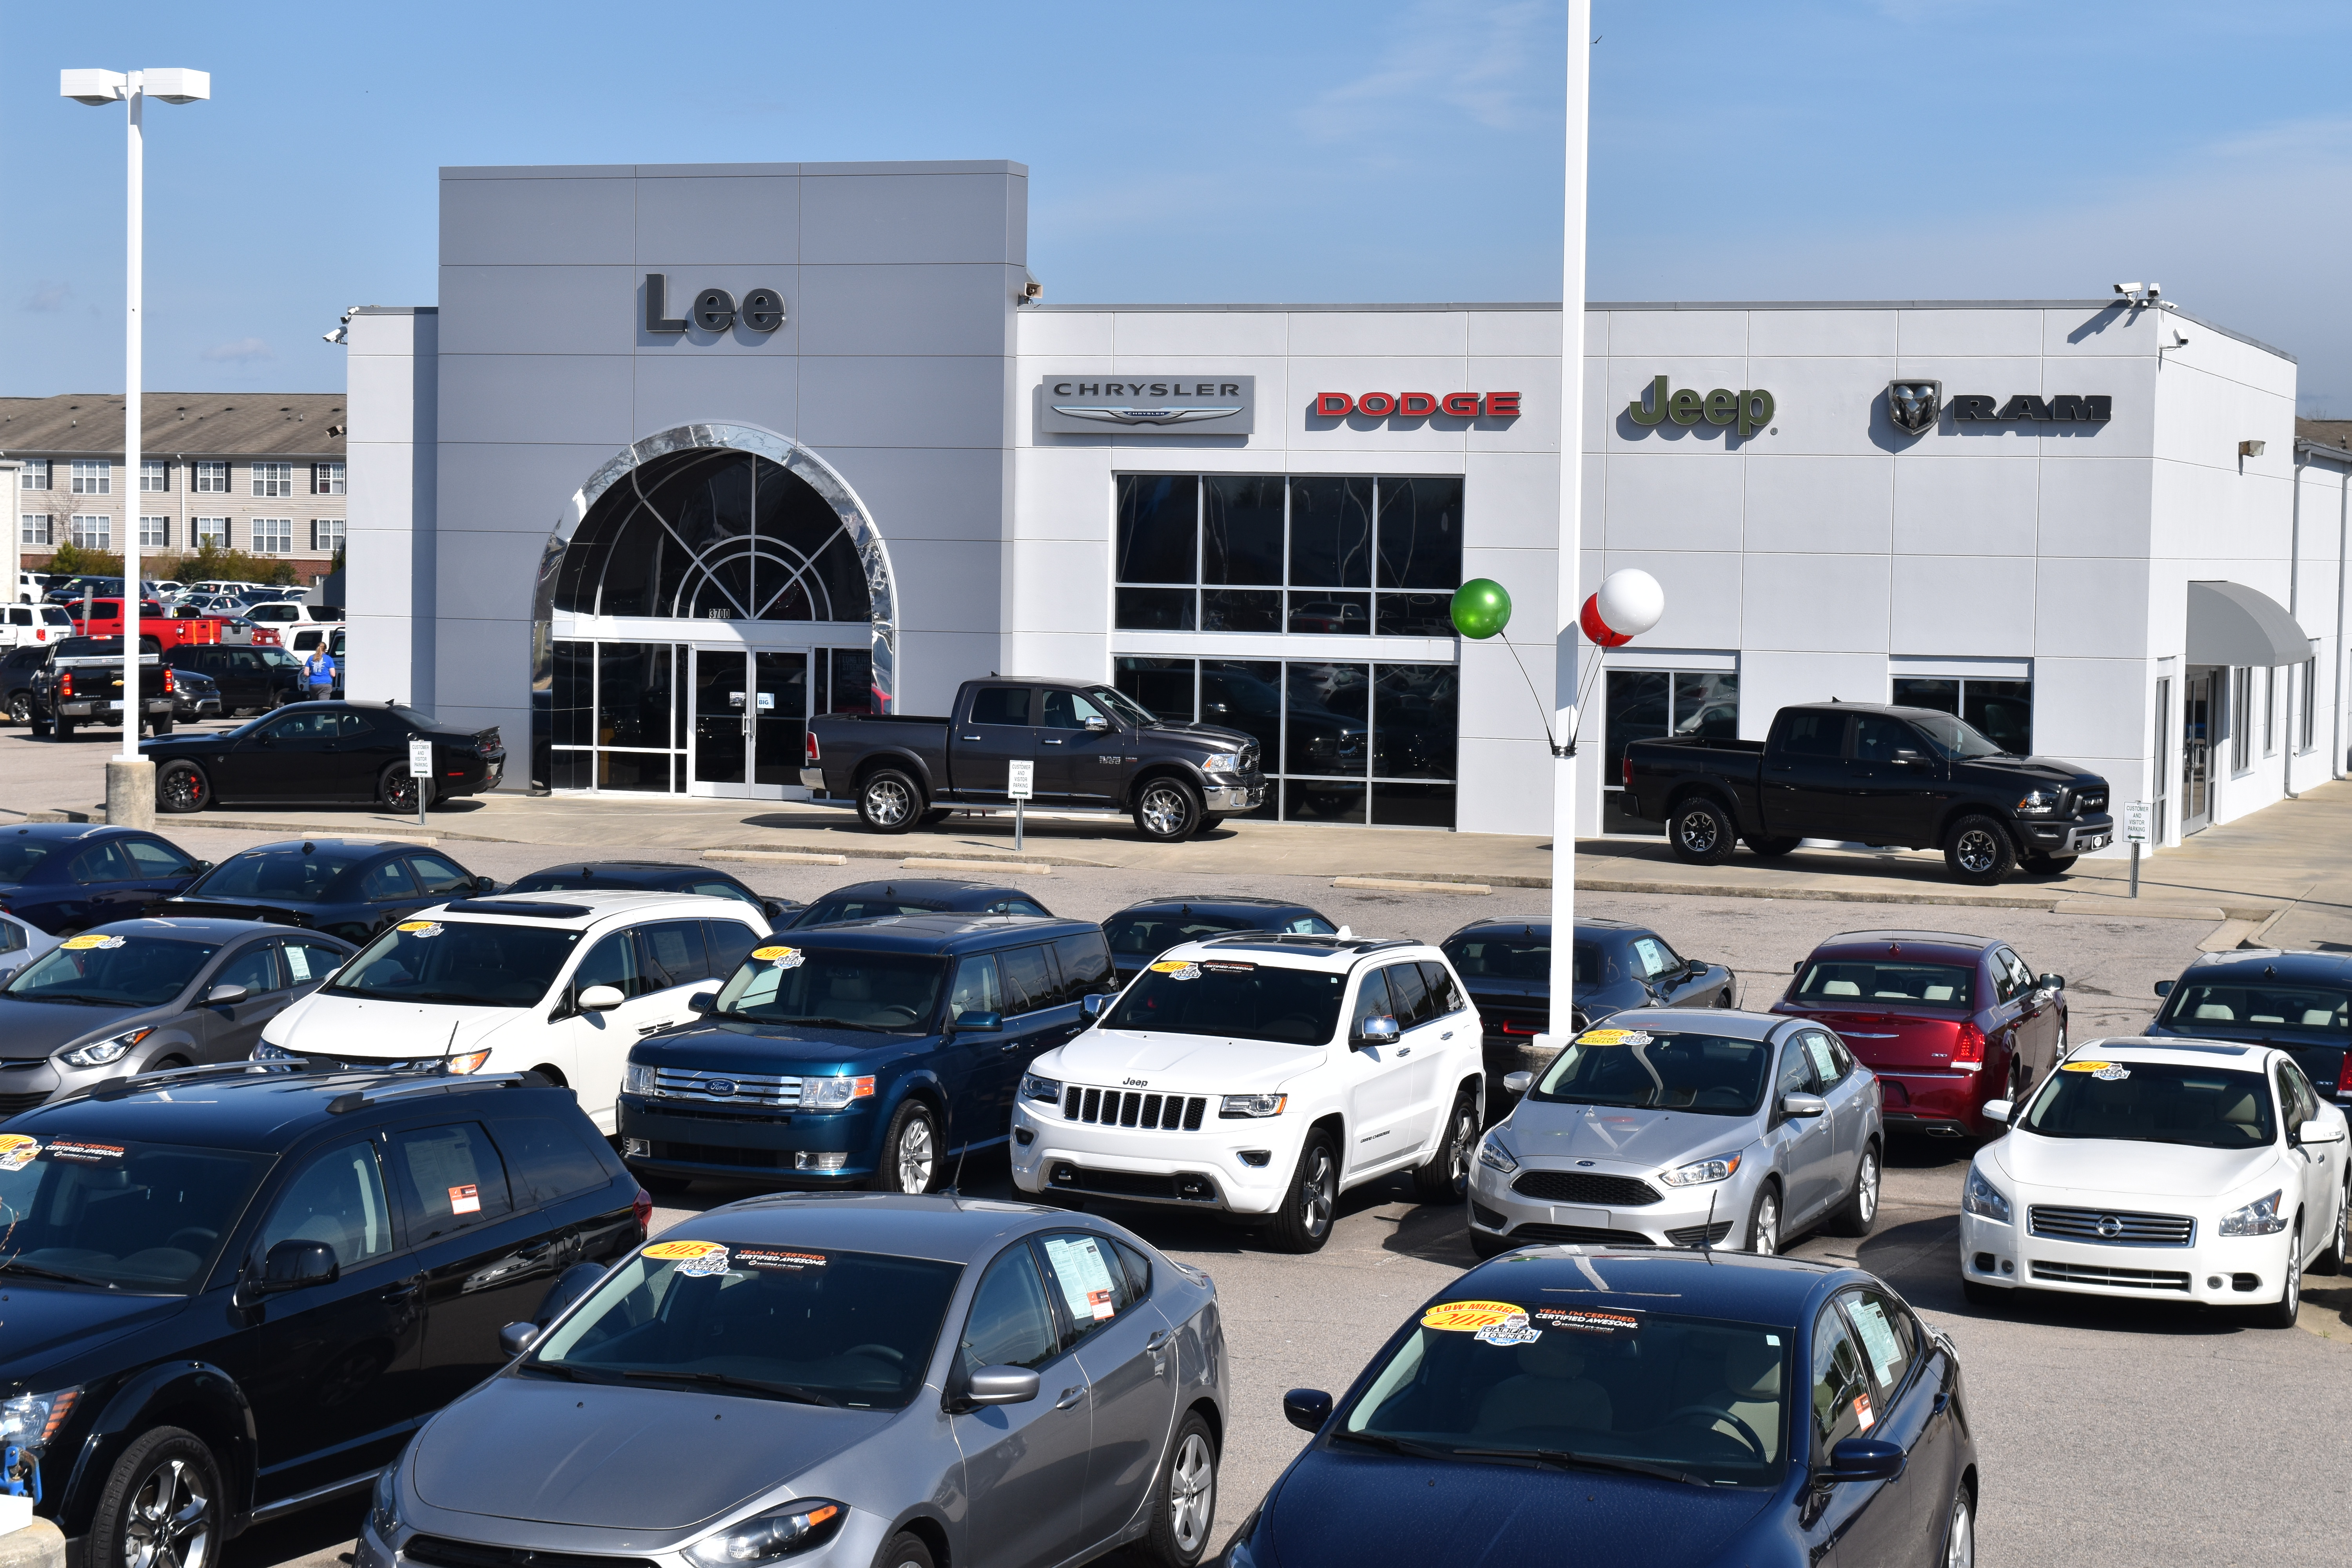 Lee Chrysler Dodge Jeep RAM in Wilson, NC | 149 Cars Available | Autotrader